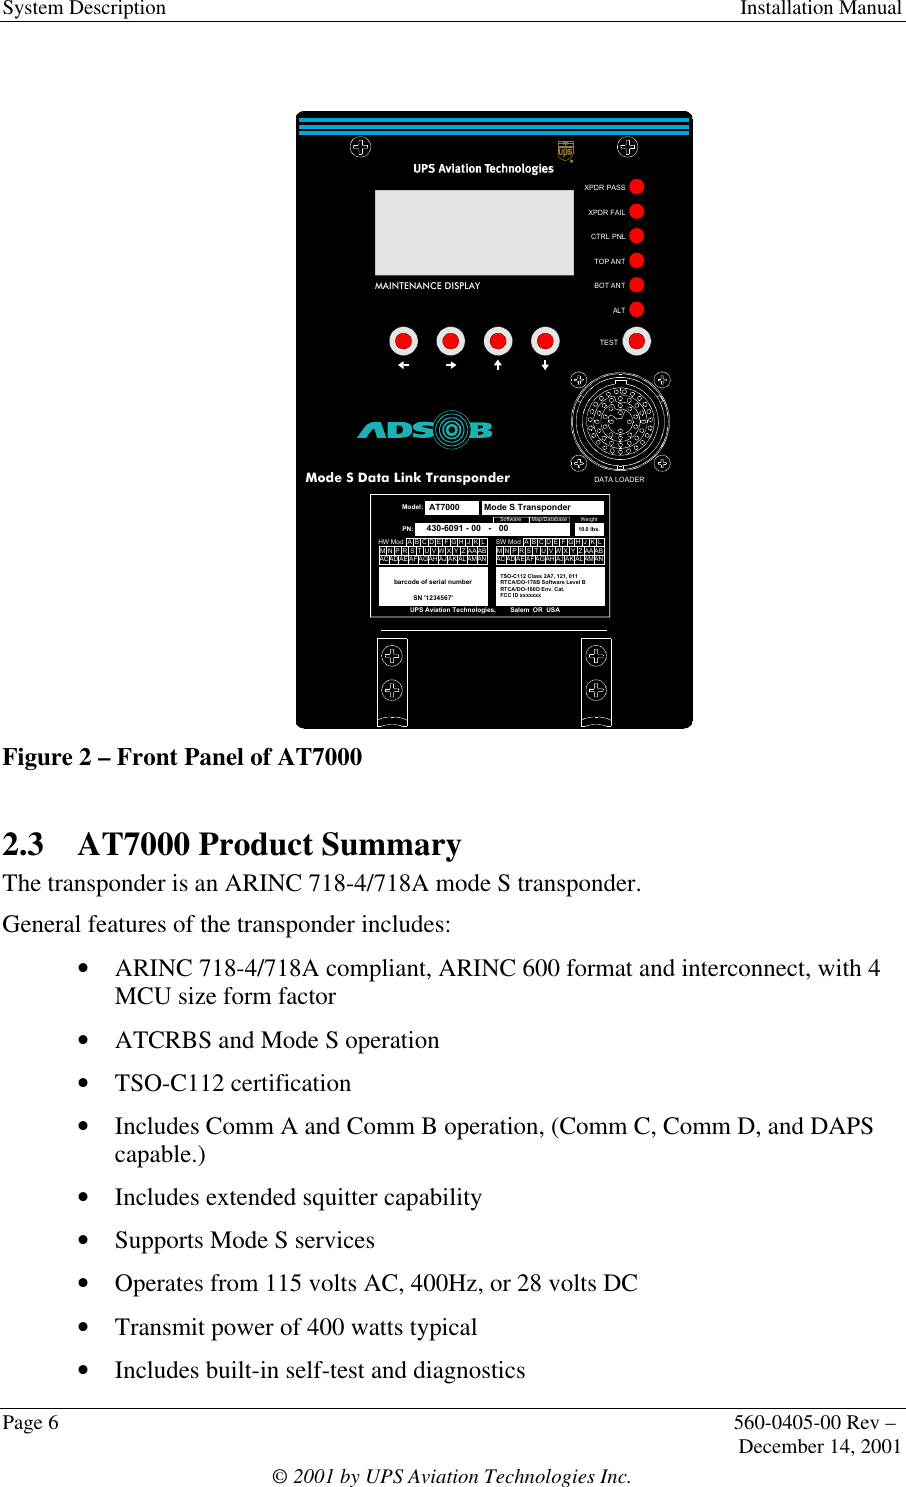 System Description Installation ManualPage 6560-0405-00 Rev –December 14, 2001© 2001 by UPS Aviation Technologies Inc.Figure 2 – Front Panel of AT70002.3 AT7000 Product SummaryThe transponder is an ARINC 718-4/718A mode S transponder.General features of the transponder includes:• ARINC 718-4/718A compliant, ARINC 600 format and interconnect, with 4MCU size form factor• ATCRBS and Mode S operation• TSO-C112 certification• Includes Comm A and Comm B operation, (Comm C, Comm D, and DAPScapable.)• Includes extended squitter capability• Supports Mode S services• Operates from 115 volts AC, 400Hz, or 28 volts DC• Transmit power of 400 watts typical• Includes built-in self-test and diagnosticsMAINTENANCE DISPLAYXPDR PASSXPDR FAILCTRL PNLALTTOP ANTBOT ANTTESTDATA LOADERAT7000Mode S Data Link Transponderbarcode of serial numberSN &apos;1234567&apos;UPS Aviation Technologies,        Salem  OR  USAModel:AT7000PN:   430-6091 - 00   -   00SW ModTSO-C112 Class 2A7, 121, 011RTCA/DO-178B Software Level BRTCA/DO-160D Env. Cat.FCC ID xxxxxxx Mode S TransponderCAADEABACBAFGHJKLZYXWVUTSRPNMADAEAFAGAHAJAKALAMANHW ModCAADEABACBA FGHJKLZYXWVUTSRPNMADAEAFAGAHAJAKALAMANSoftwareMap/DatabaseWeight10.0 lbs.